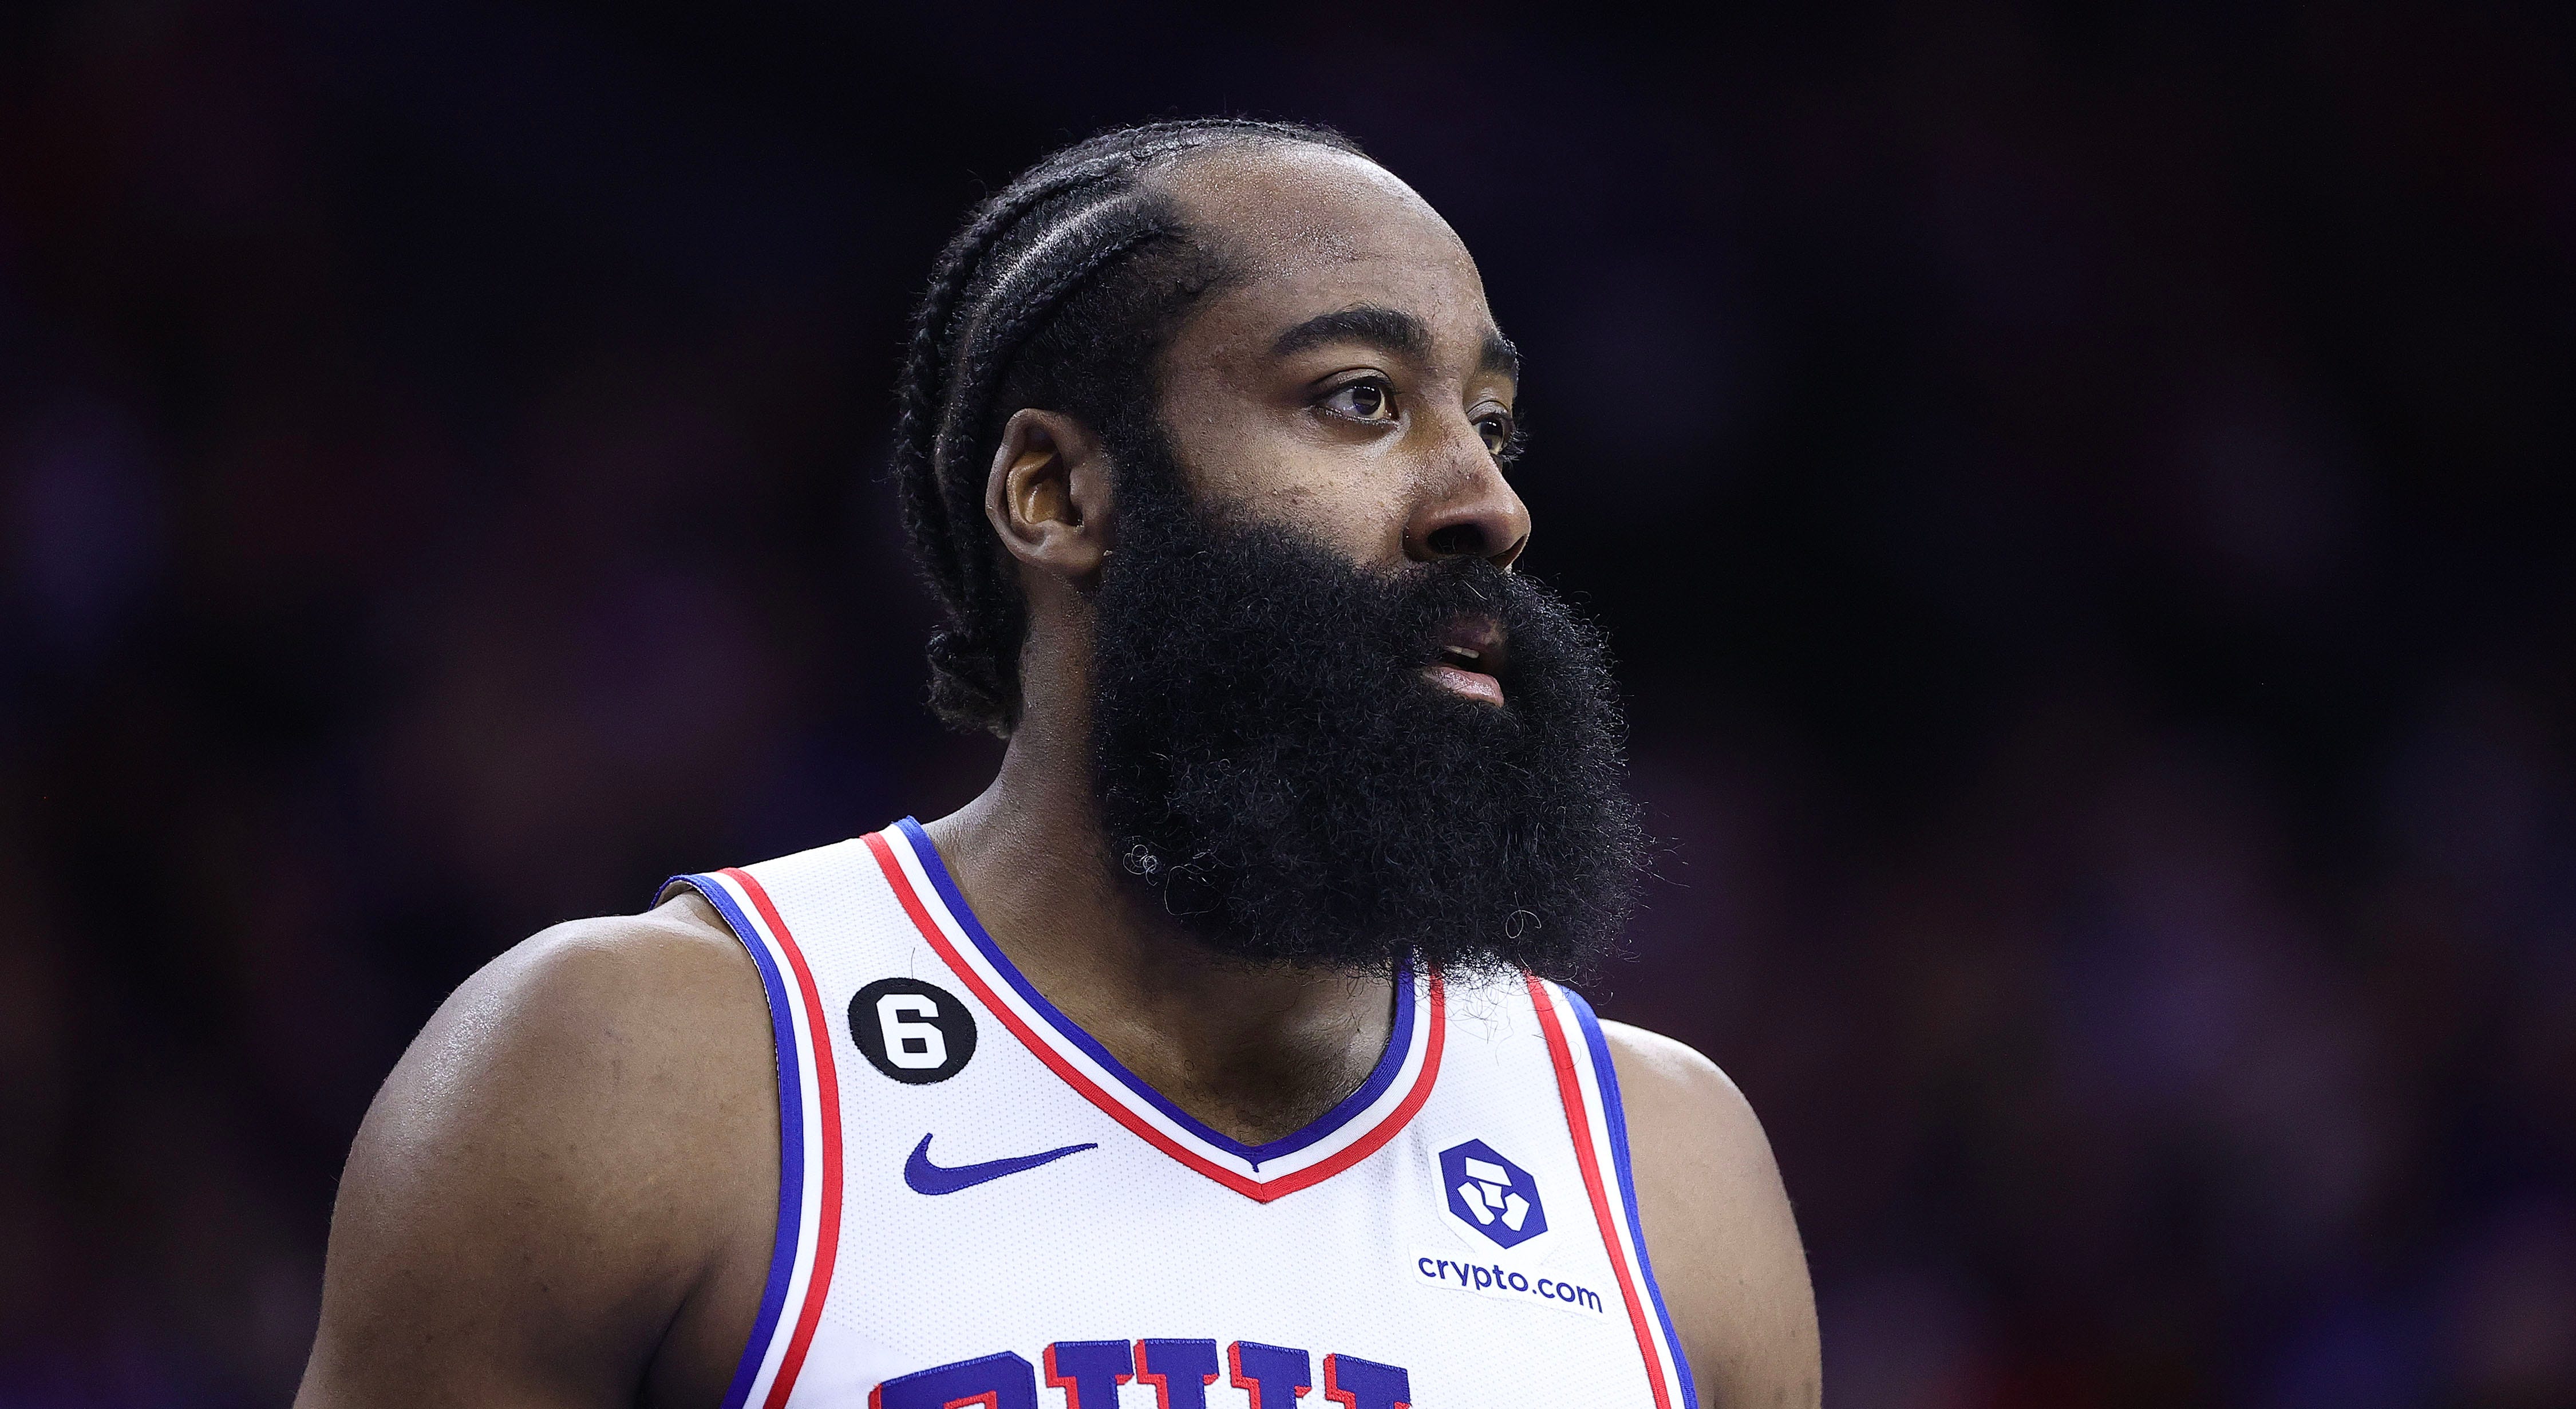 James Harden 'seriously considering' return to Rockets in 2023